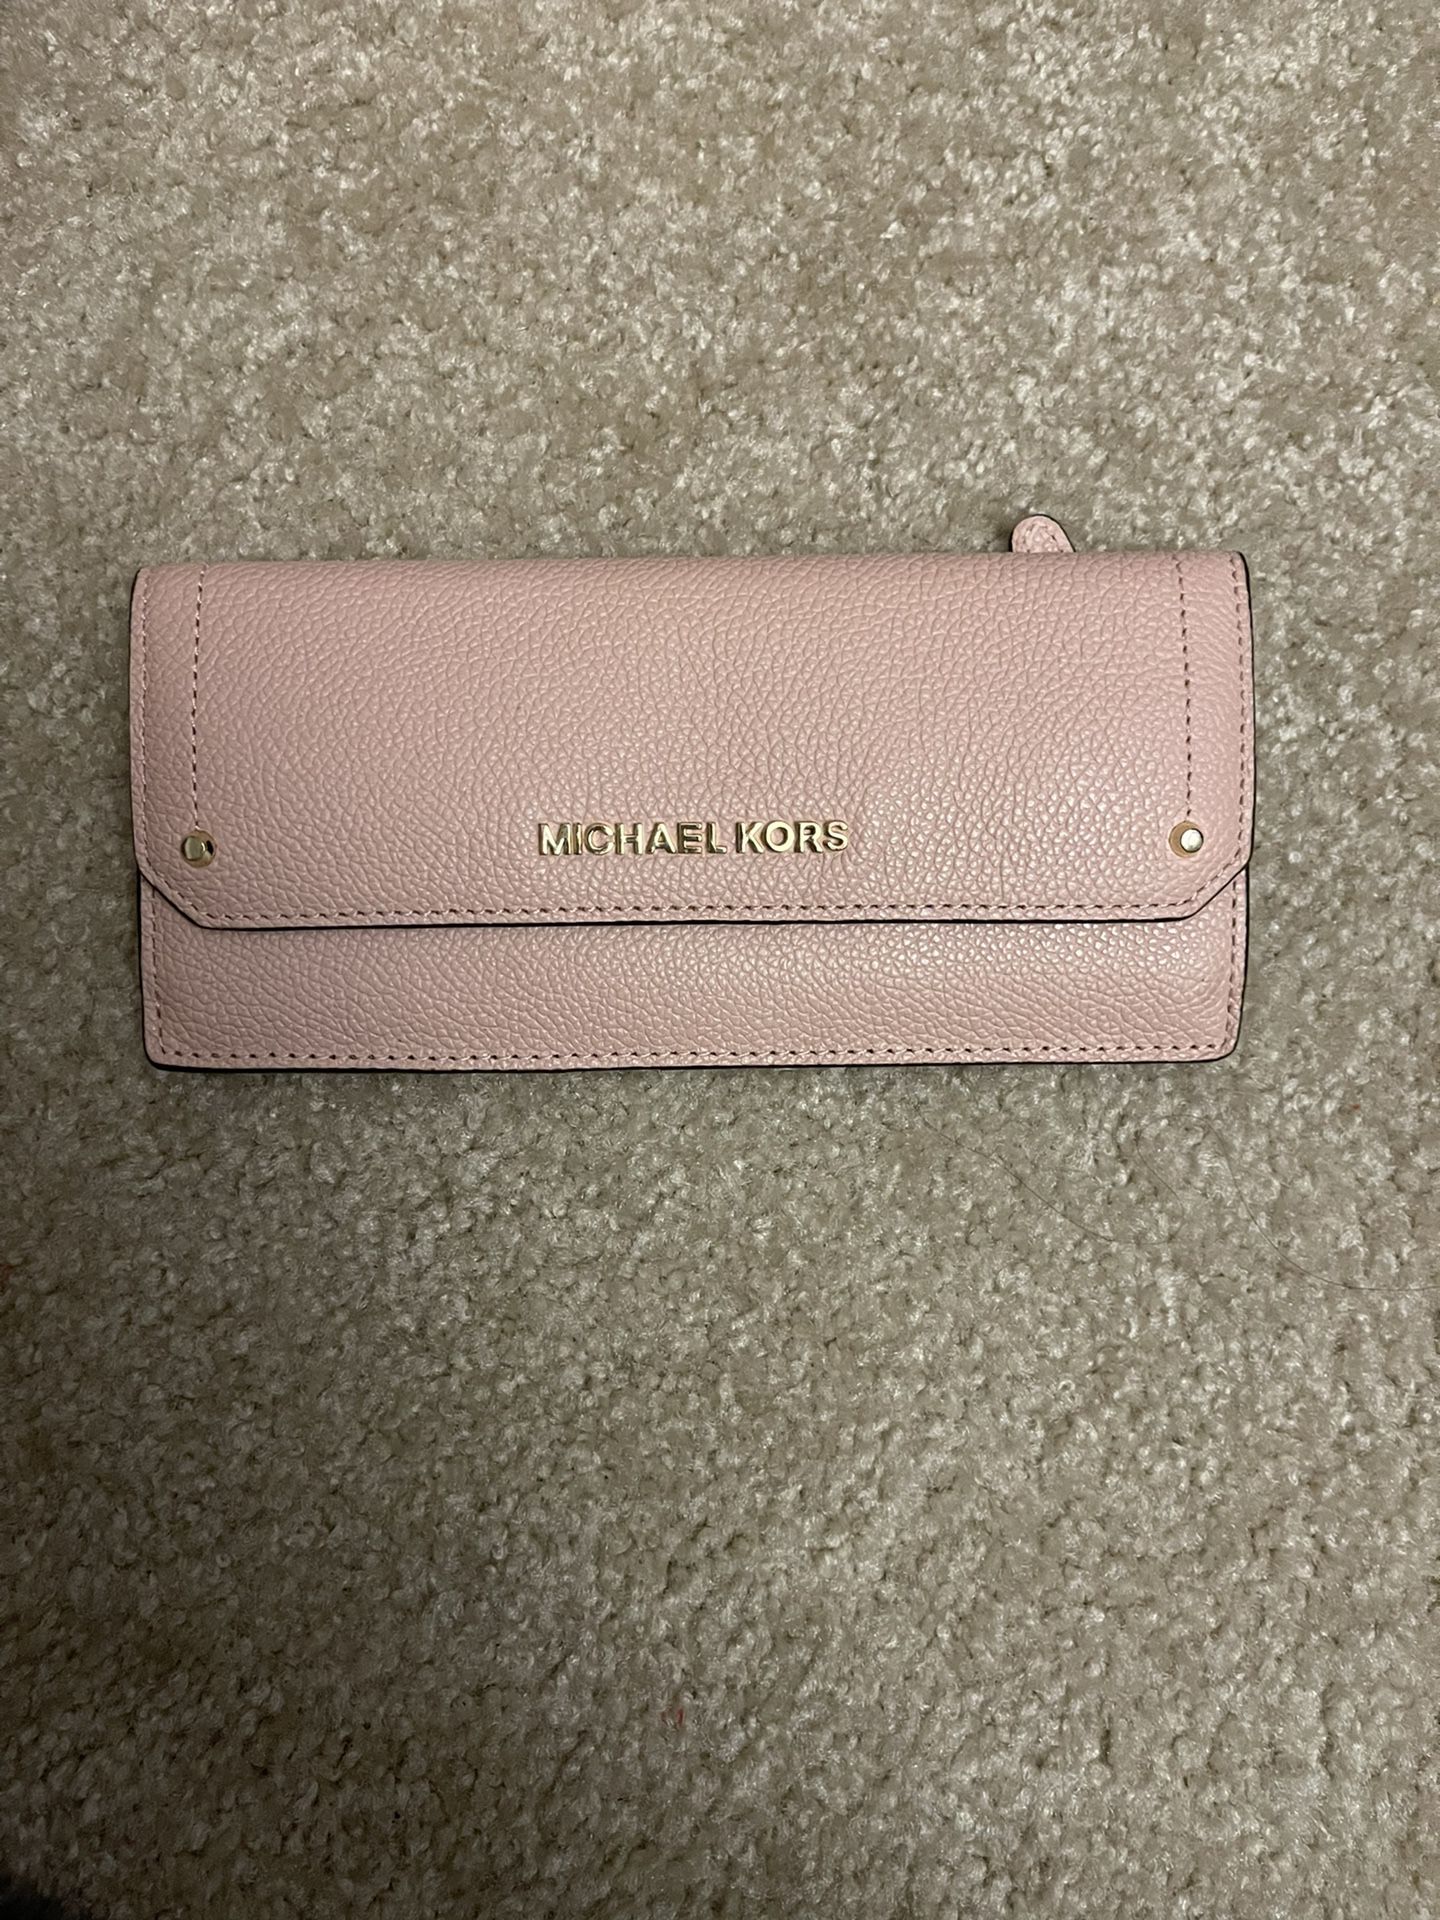 Michael Kors bag With Matching Wallet